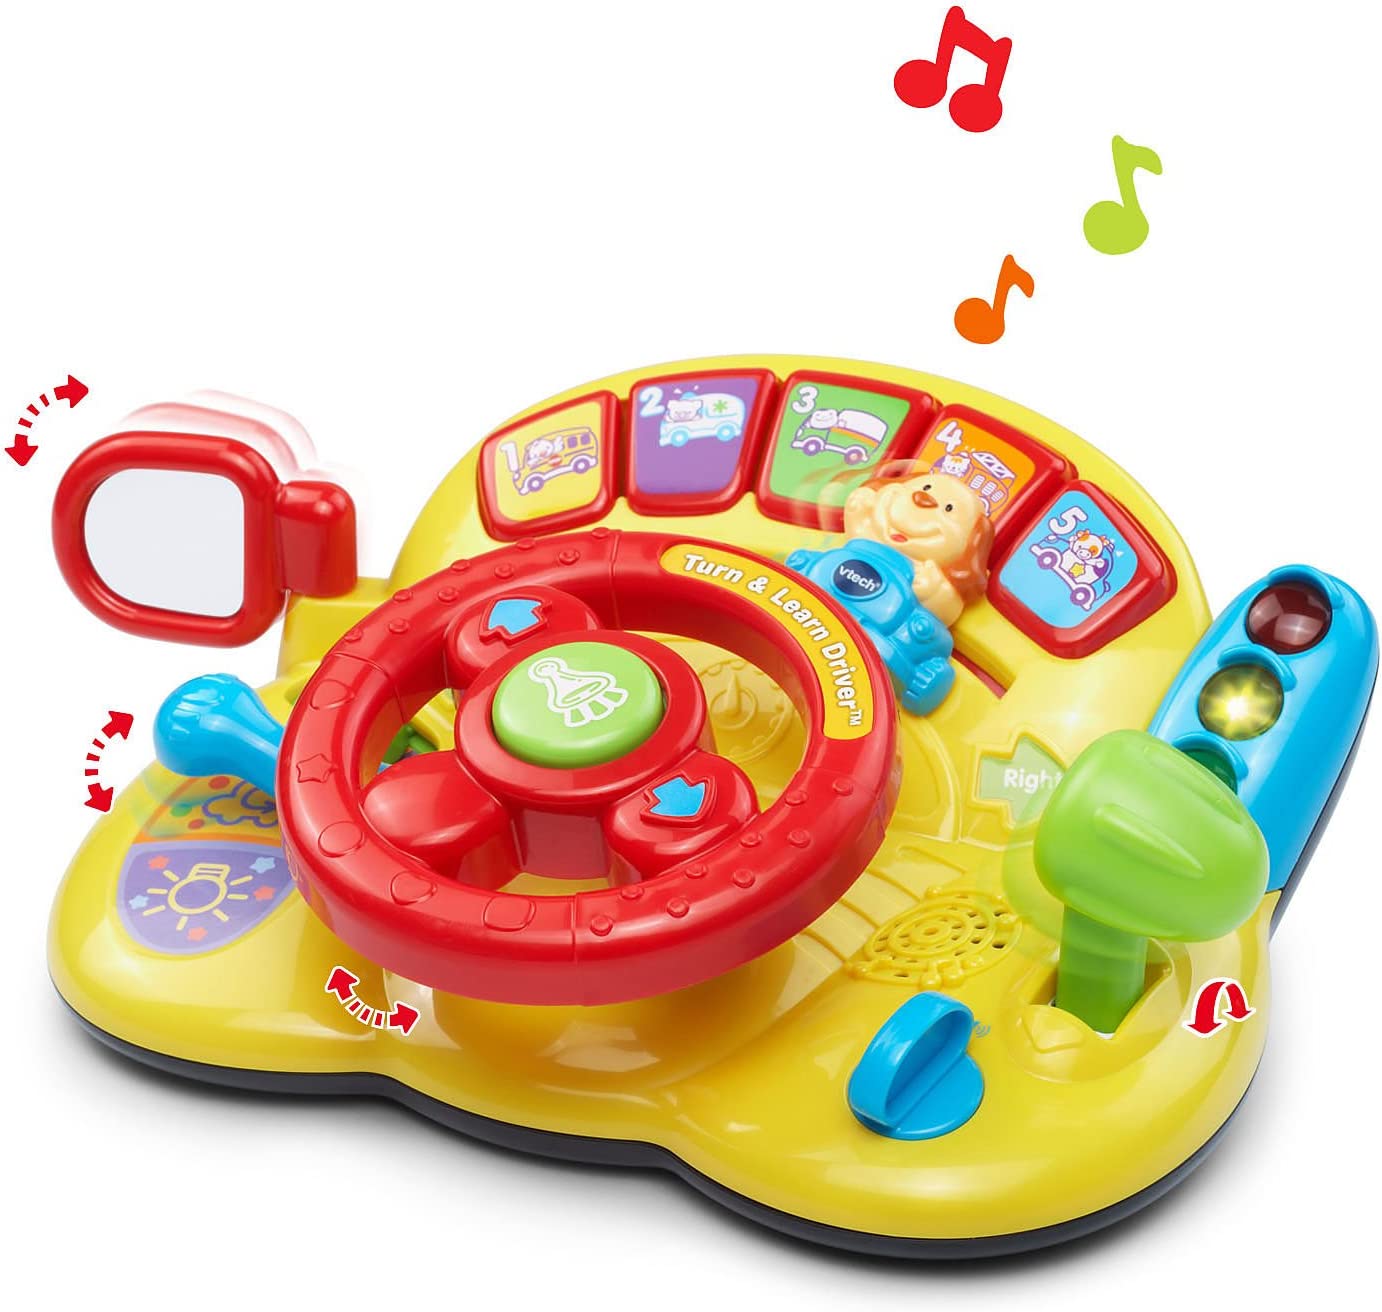 VTech Turn and Learn Driver, Yellow - Educational Toy